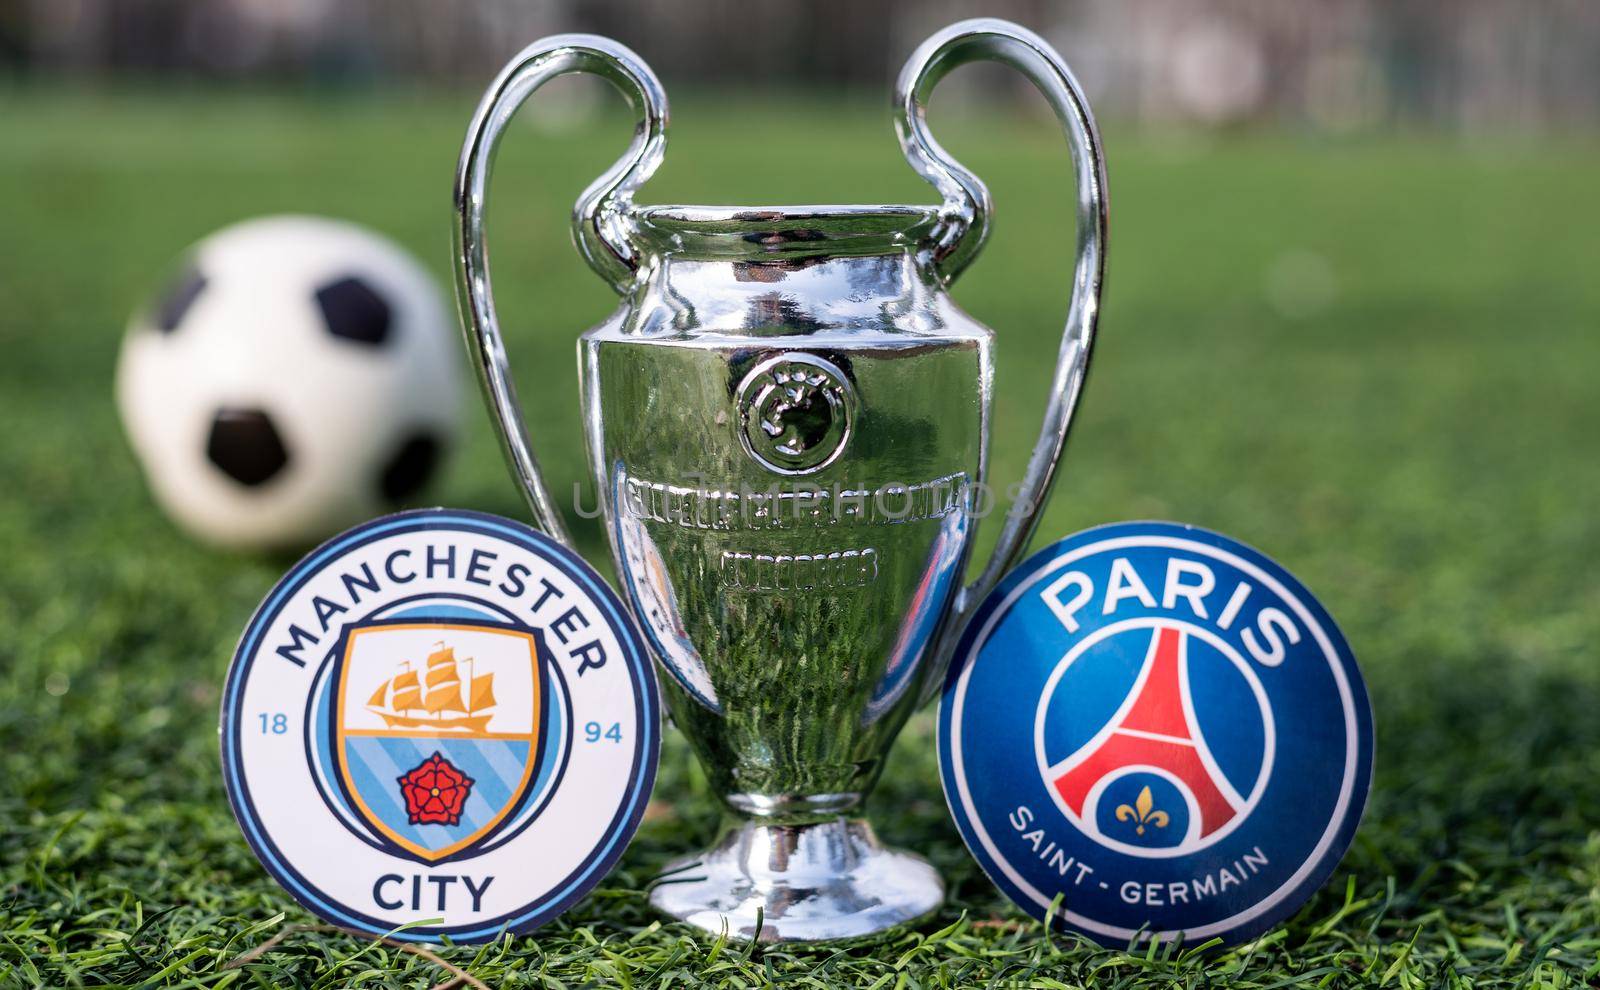 April 16, 2021 Moscow, Russia. The UEFA Champions League Cup and the emblems of the football clubs Paris Saint-Germain F. C. and Manchester City F. C. on the green grass of the lawn.